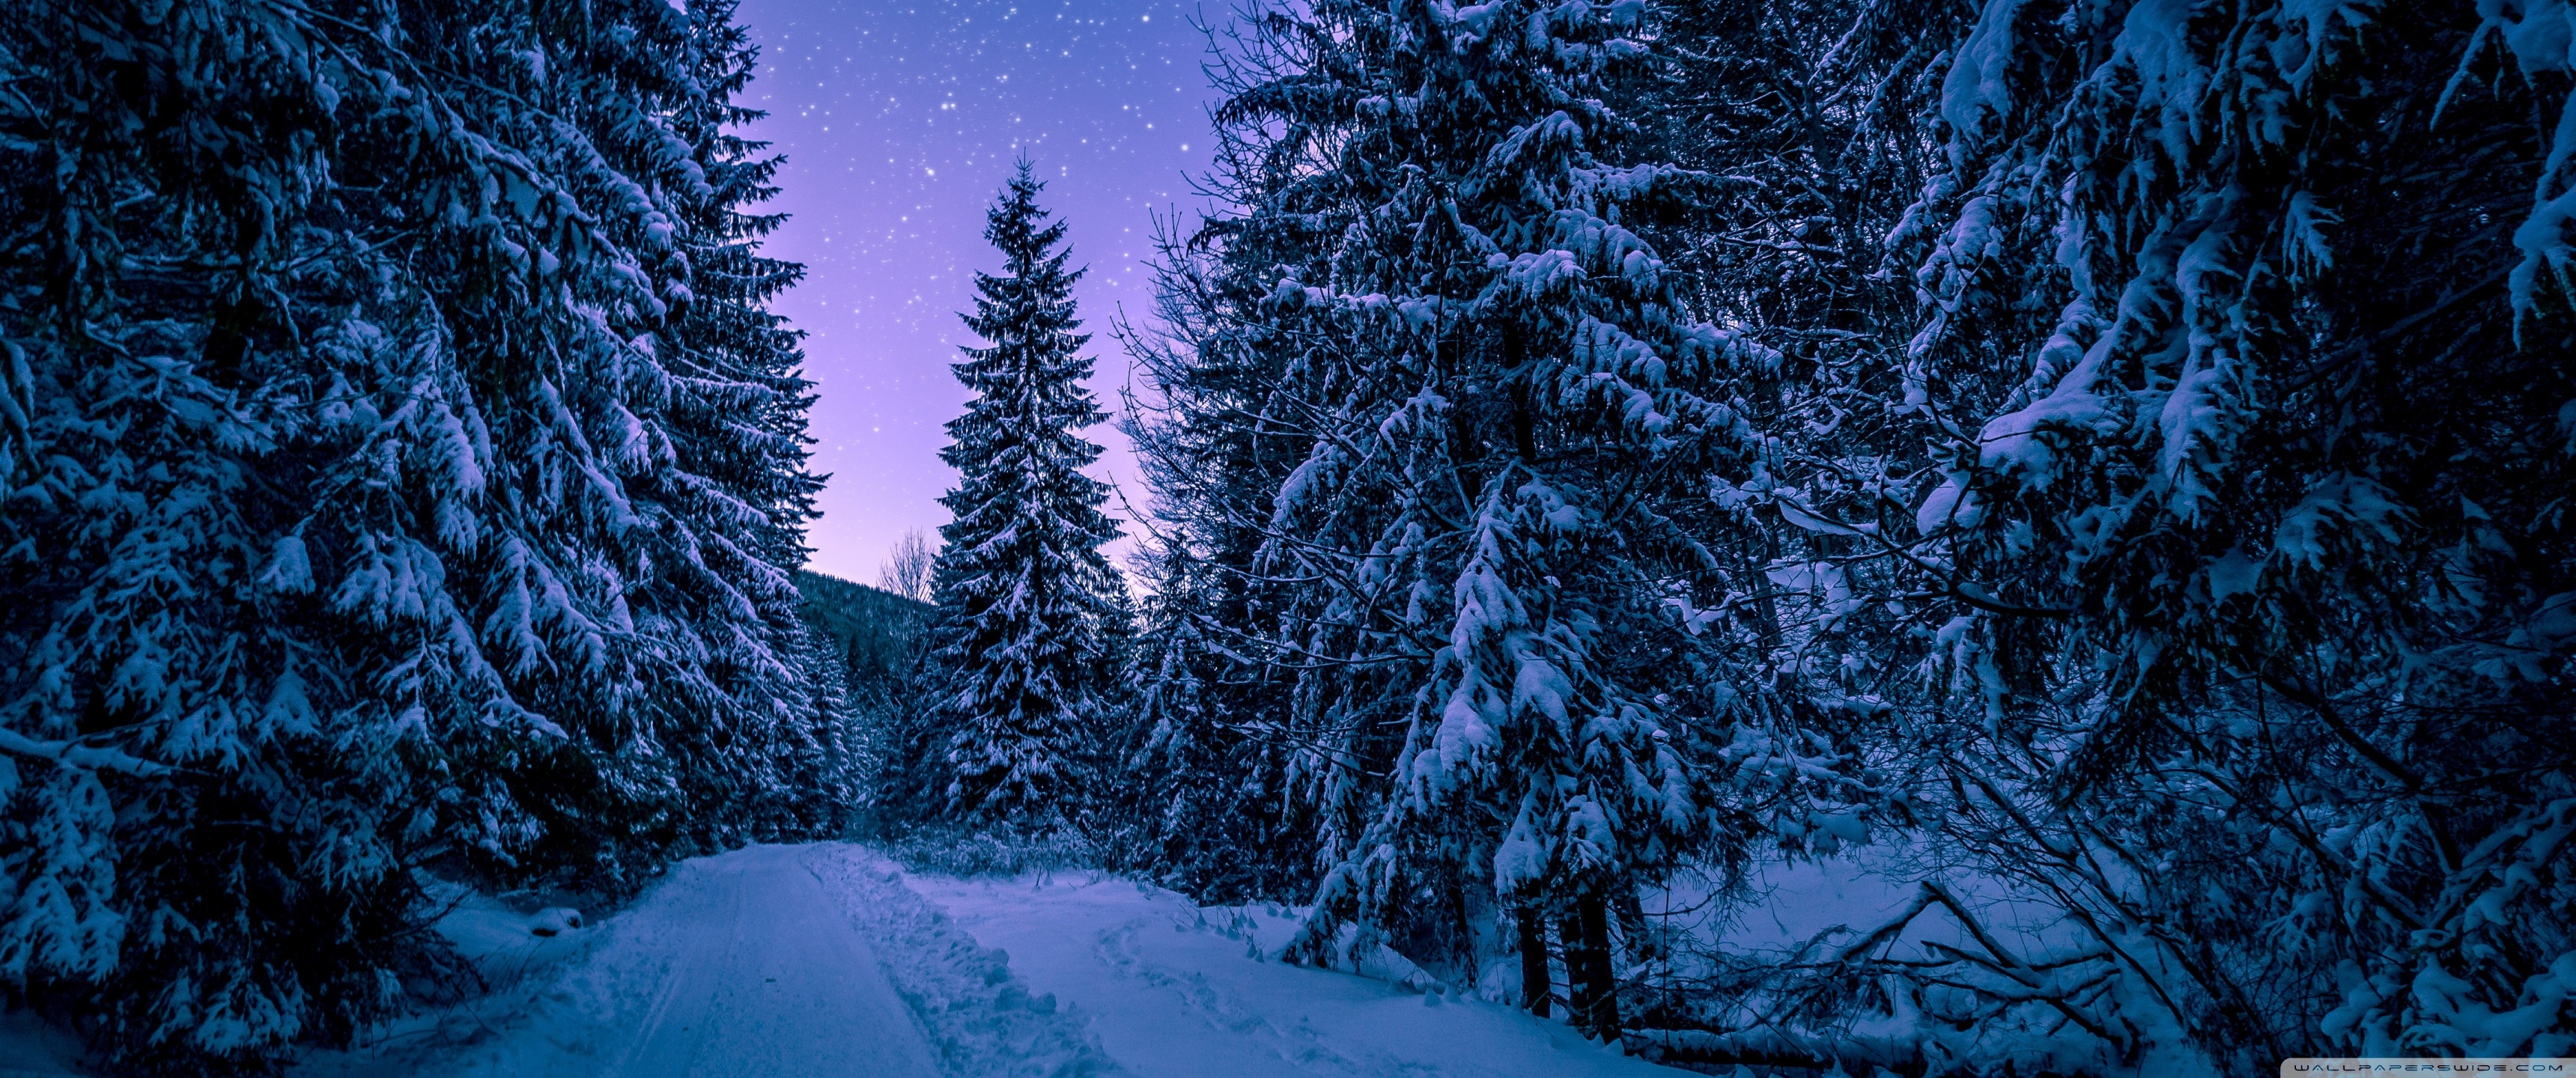 Download 21 snow-forest-night Photo-Nature-Winter-Snow-Forests-Night-Trees-Seasons-3840x2160.jpg